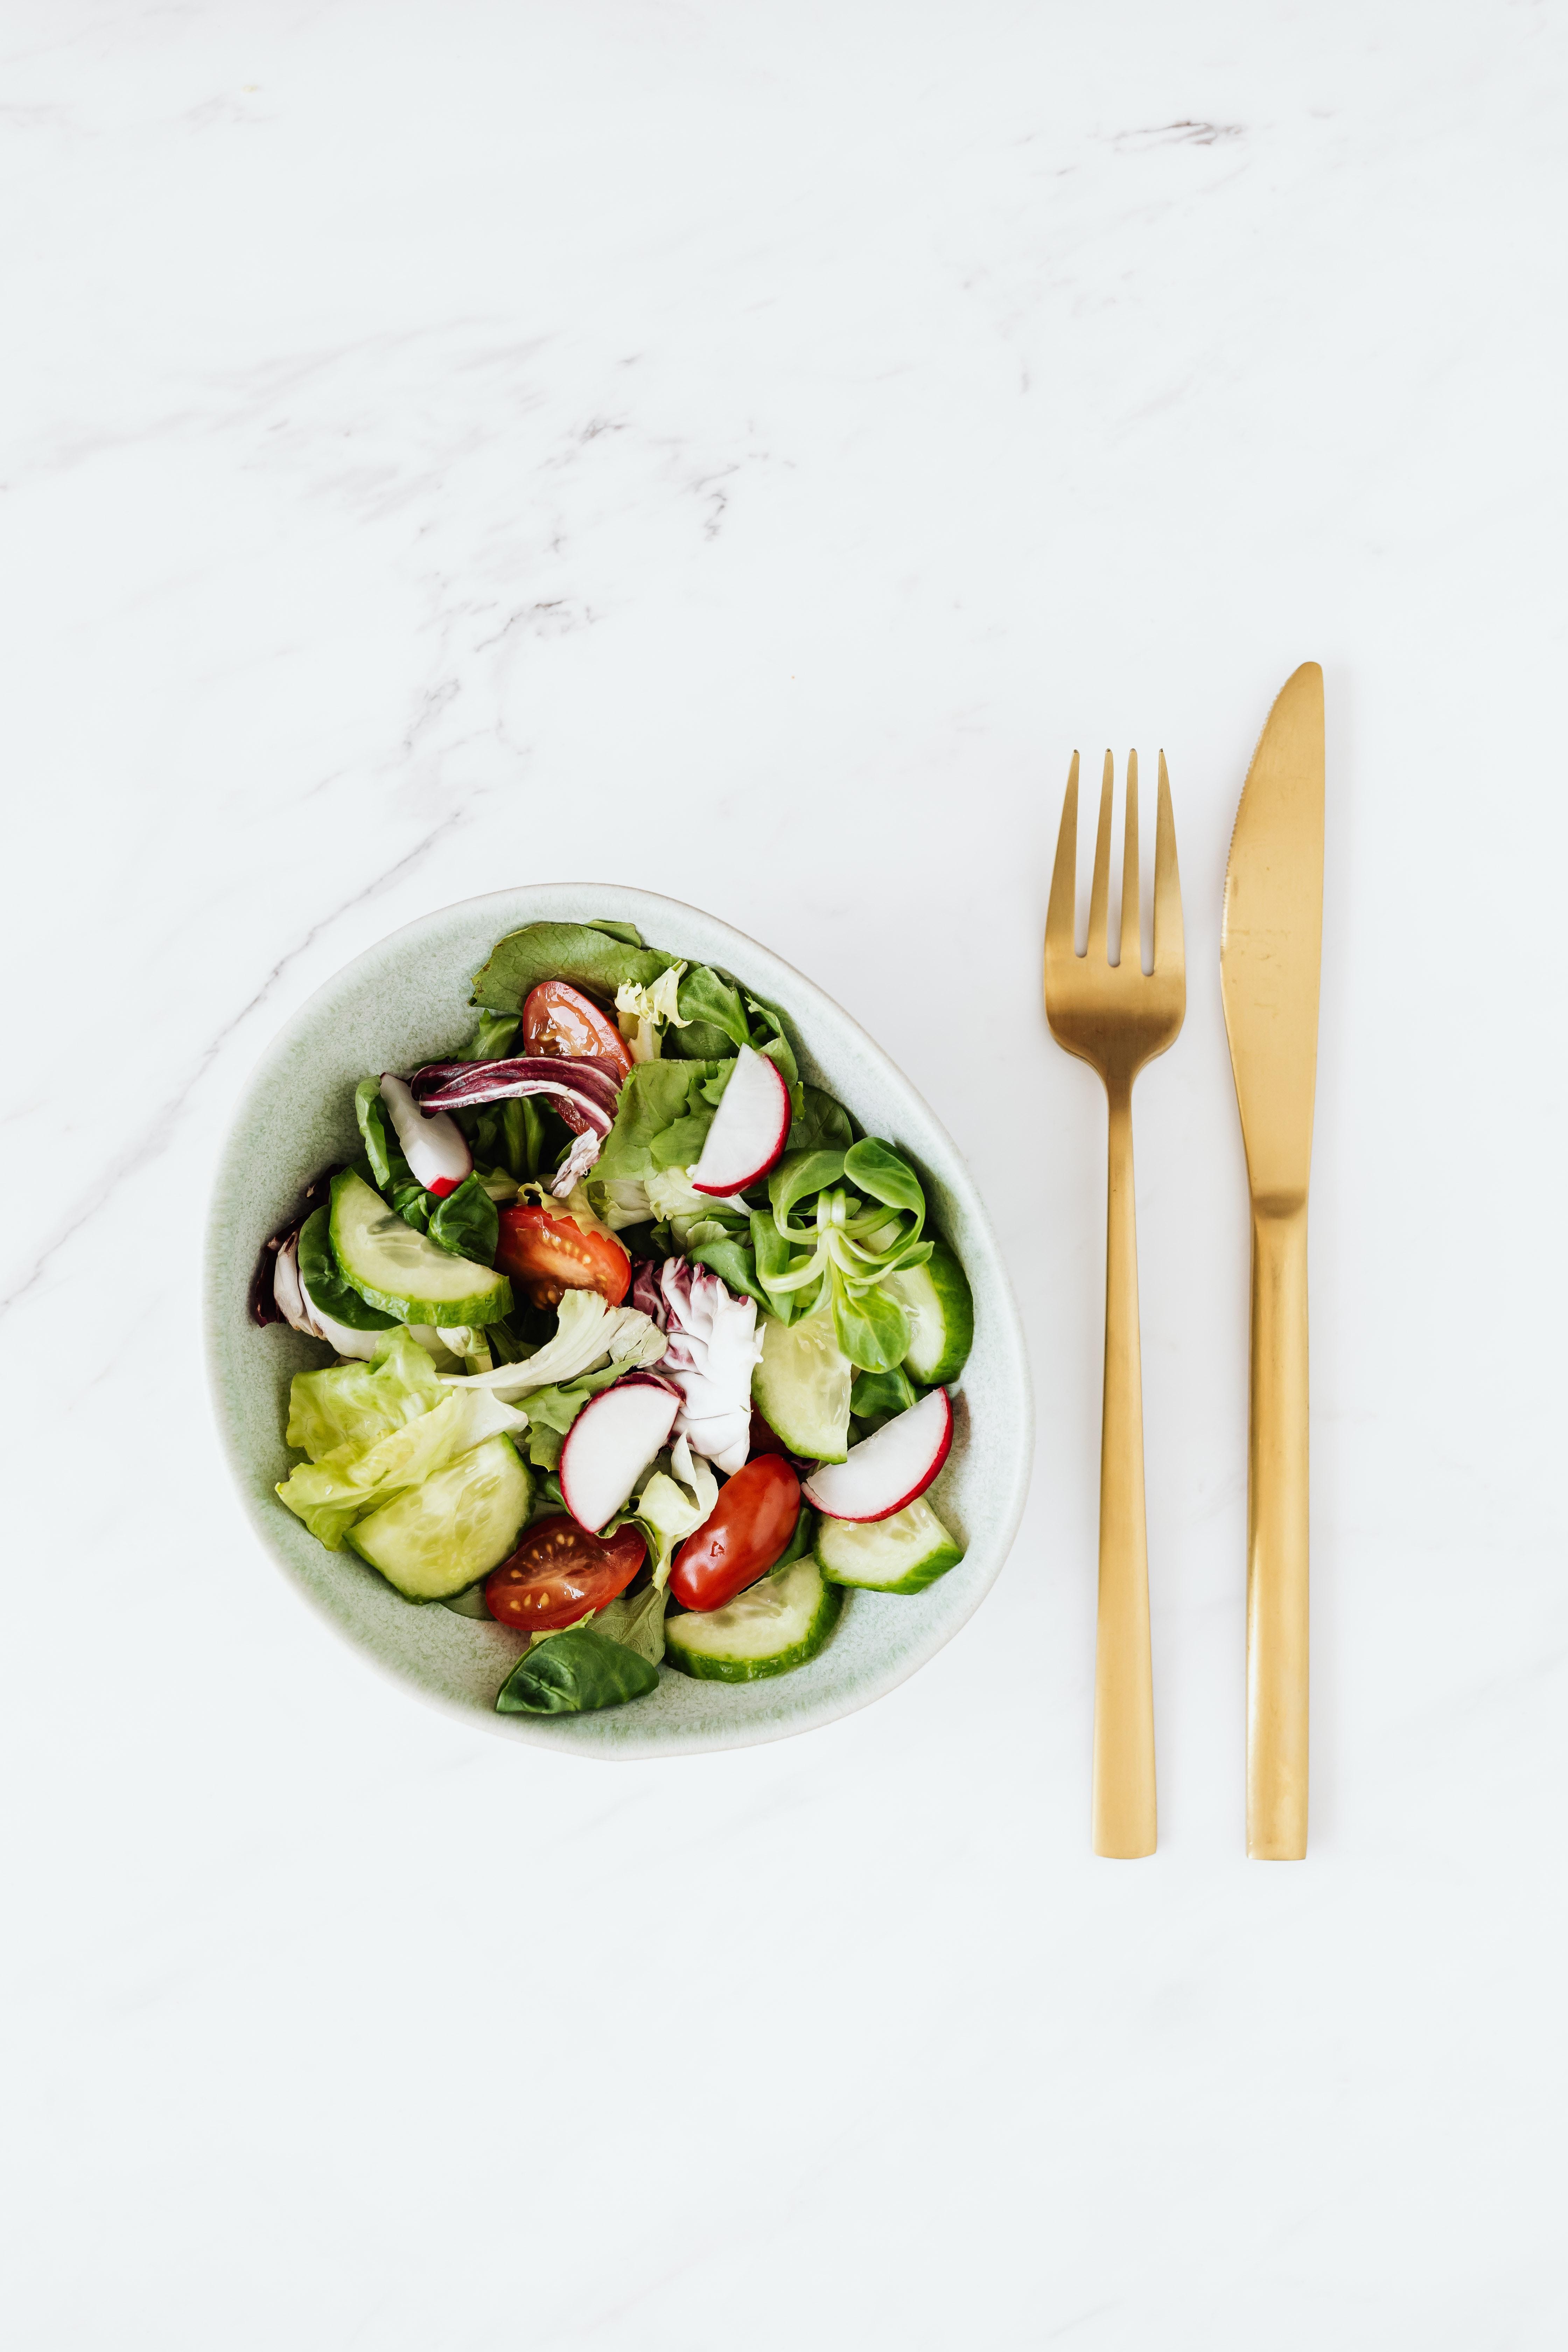 White bowl of a salad on a white background with gold fork and knife next to it.